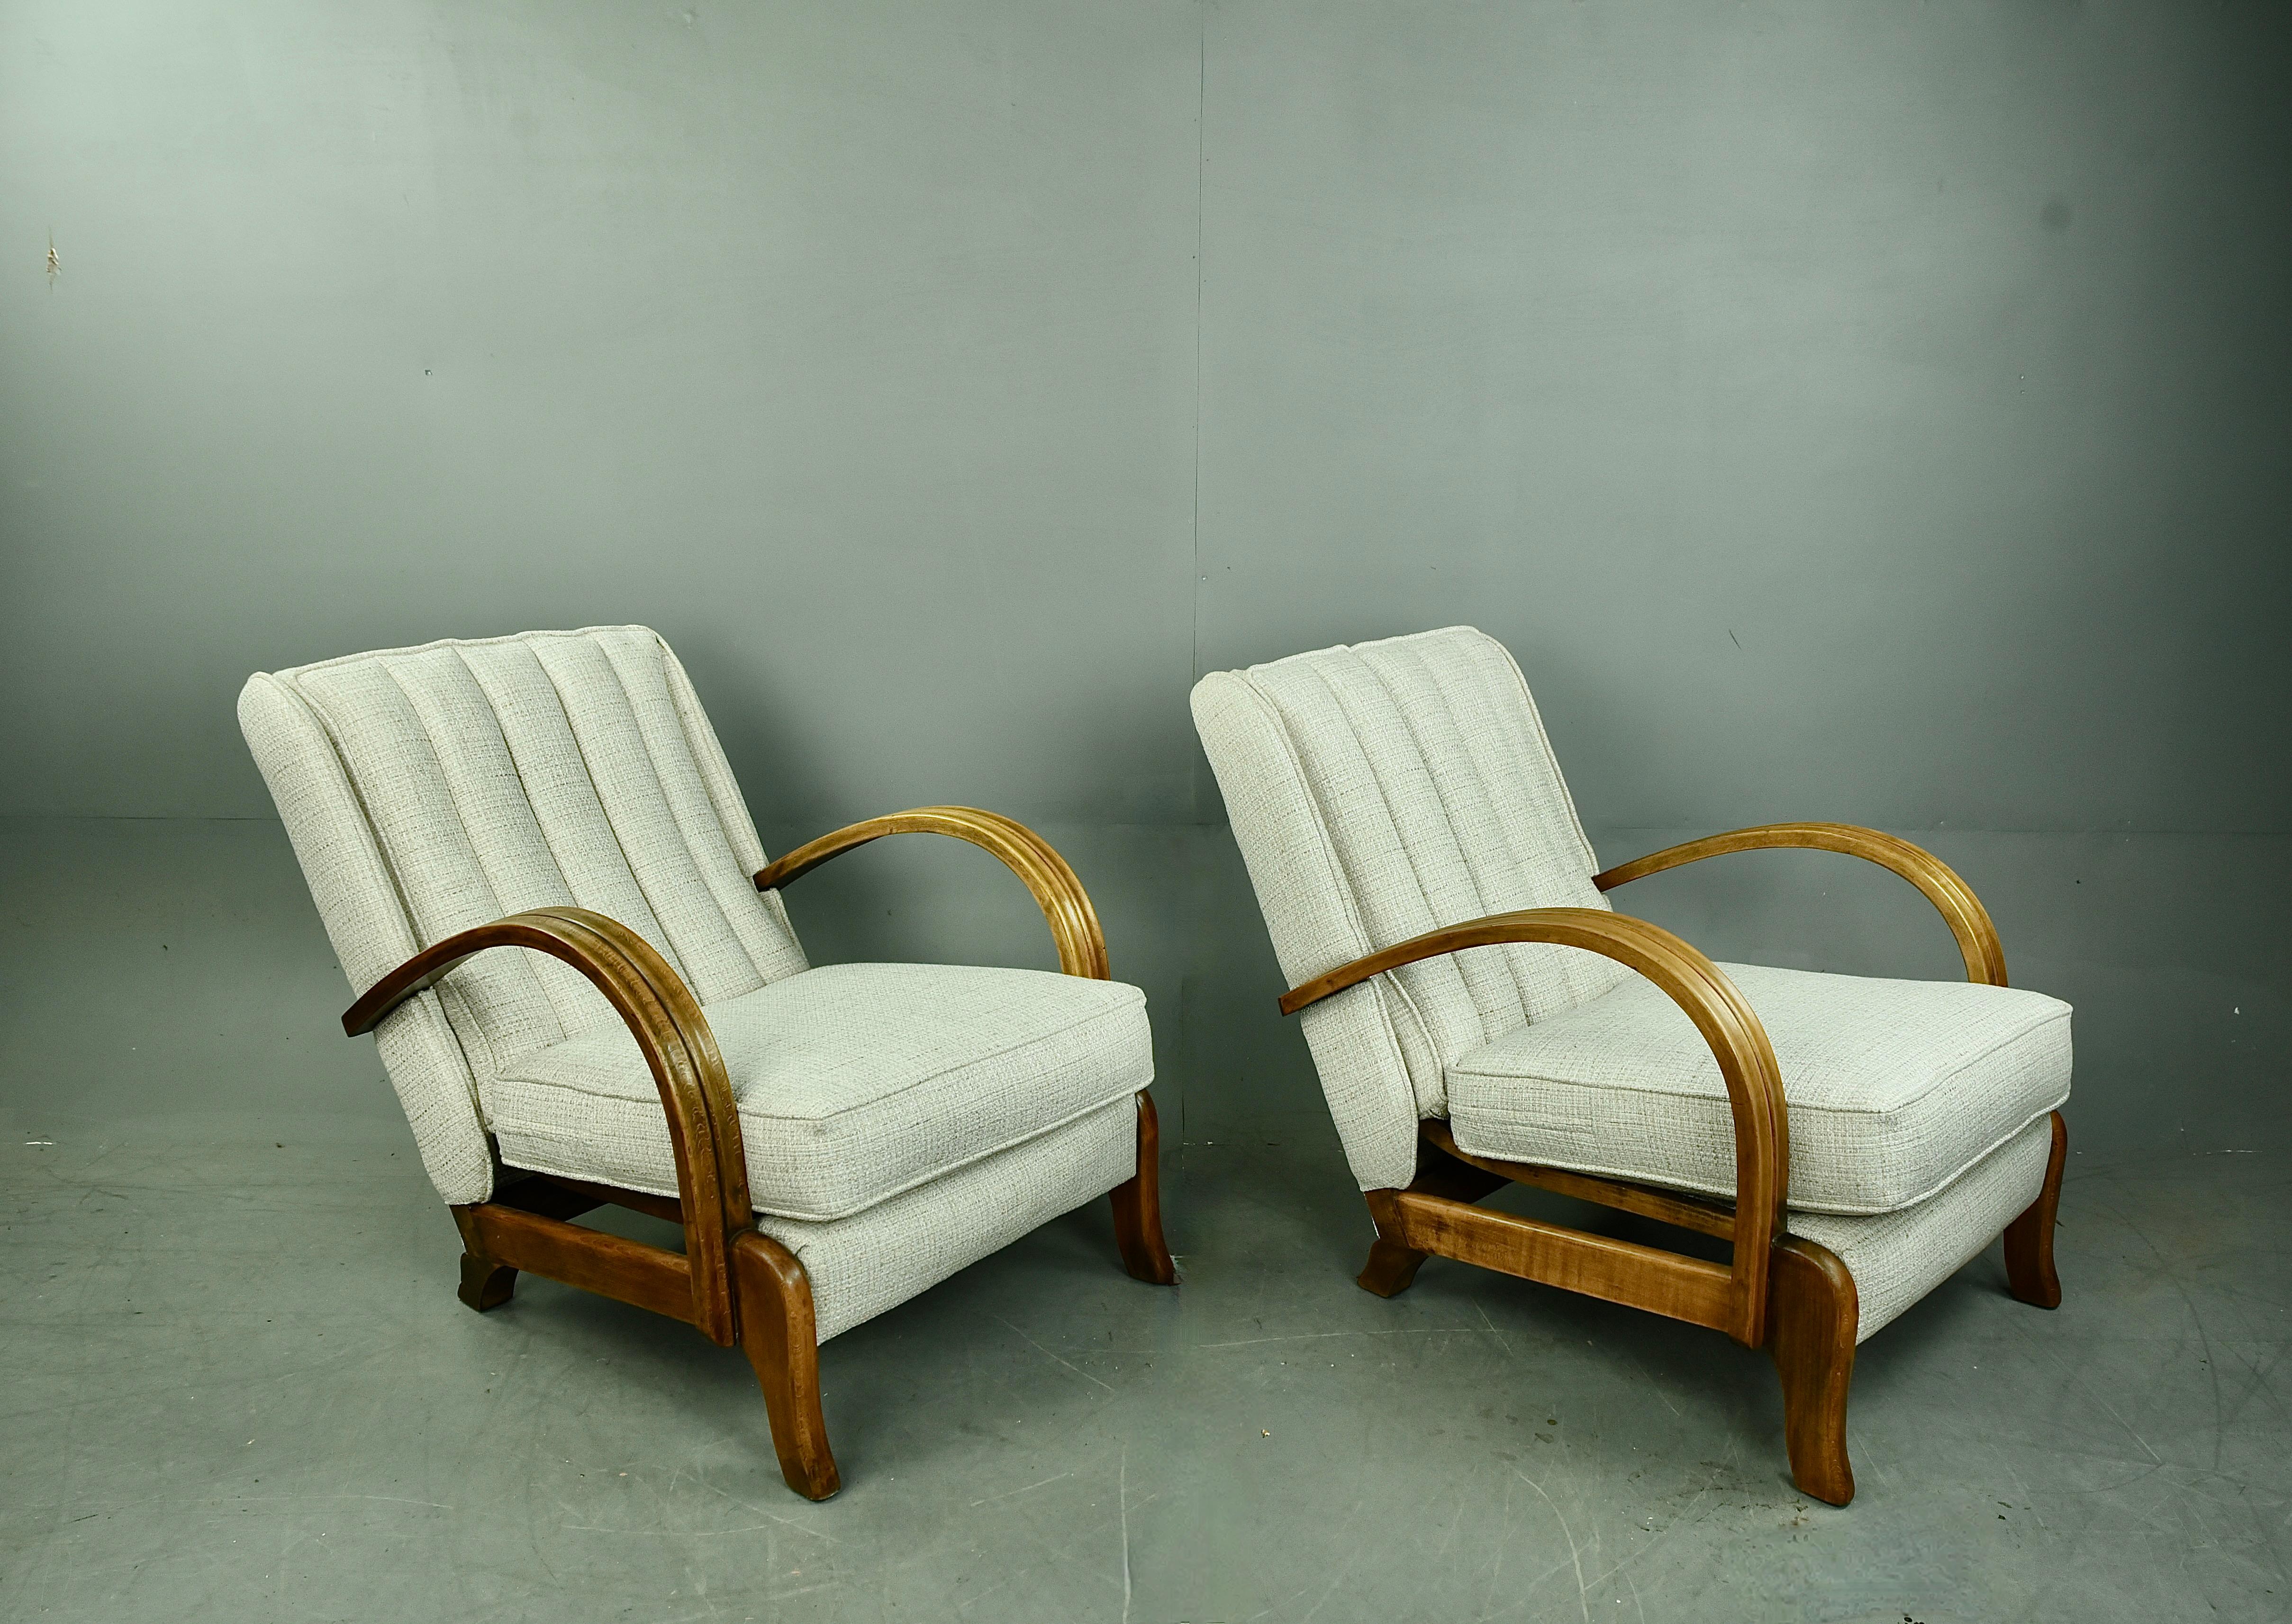 Very Rare pair of mid century Lazy chairs by M.B & S Ltd Leigh on sea Essex .
The chairs are unique in construction with a floating spring construction to the base and backs , They have wonderfully formed solid beech bentwood arms (not plywood like